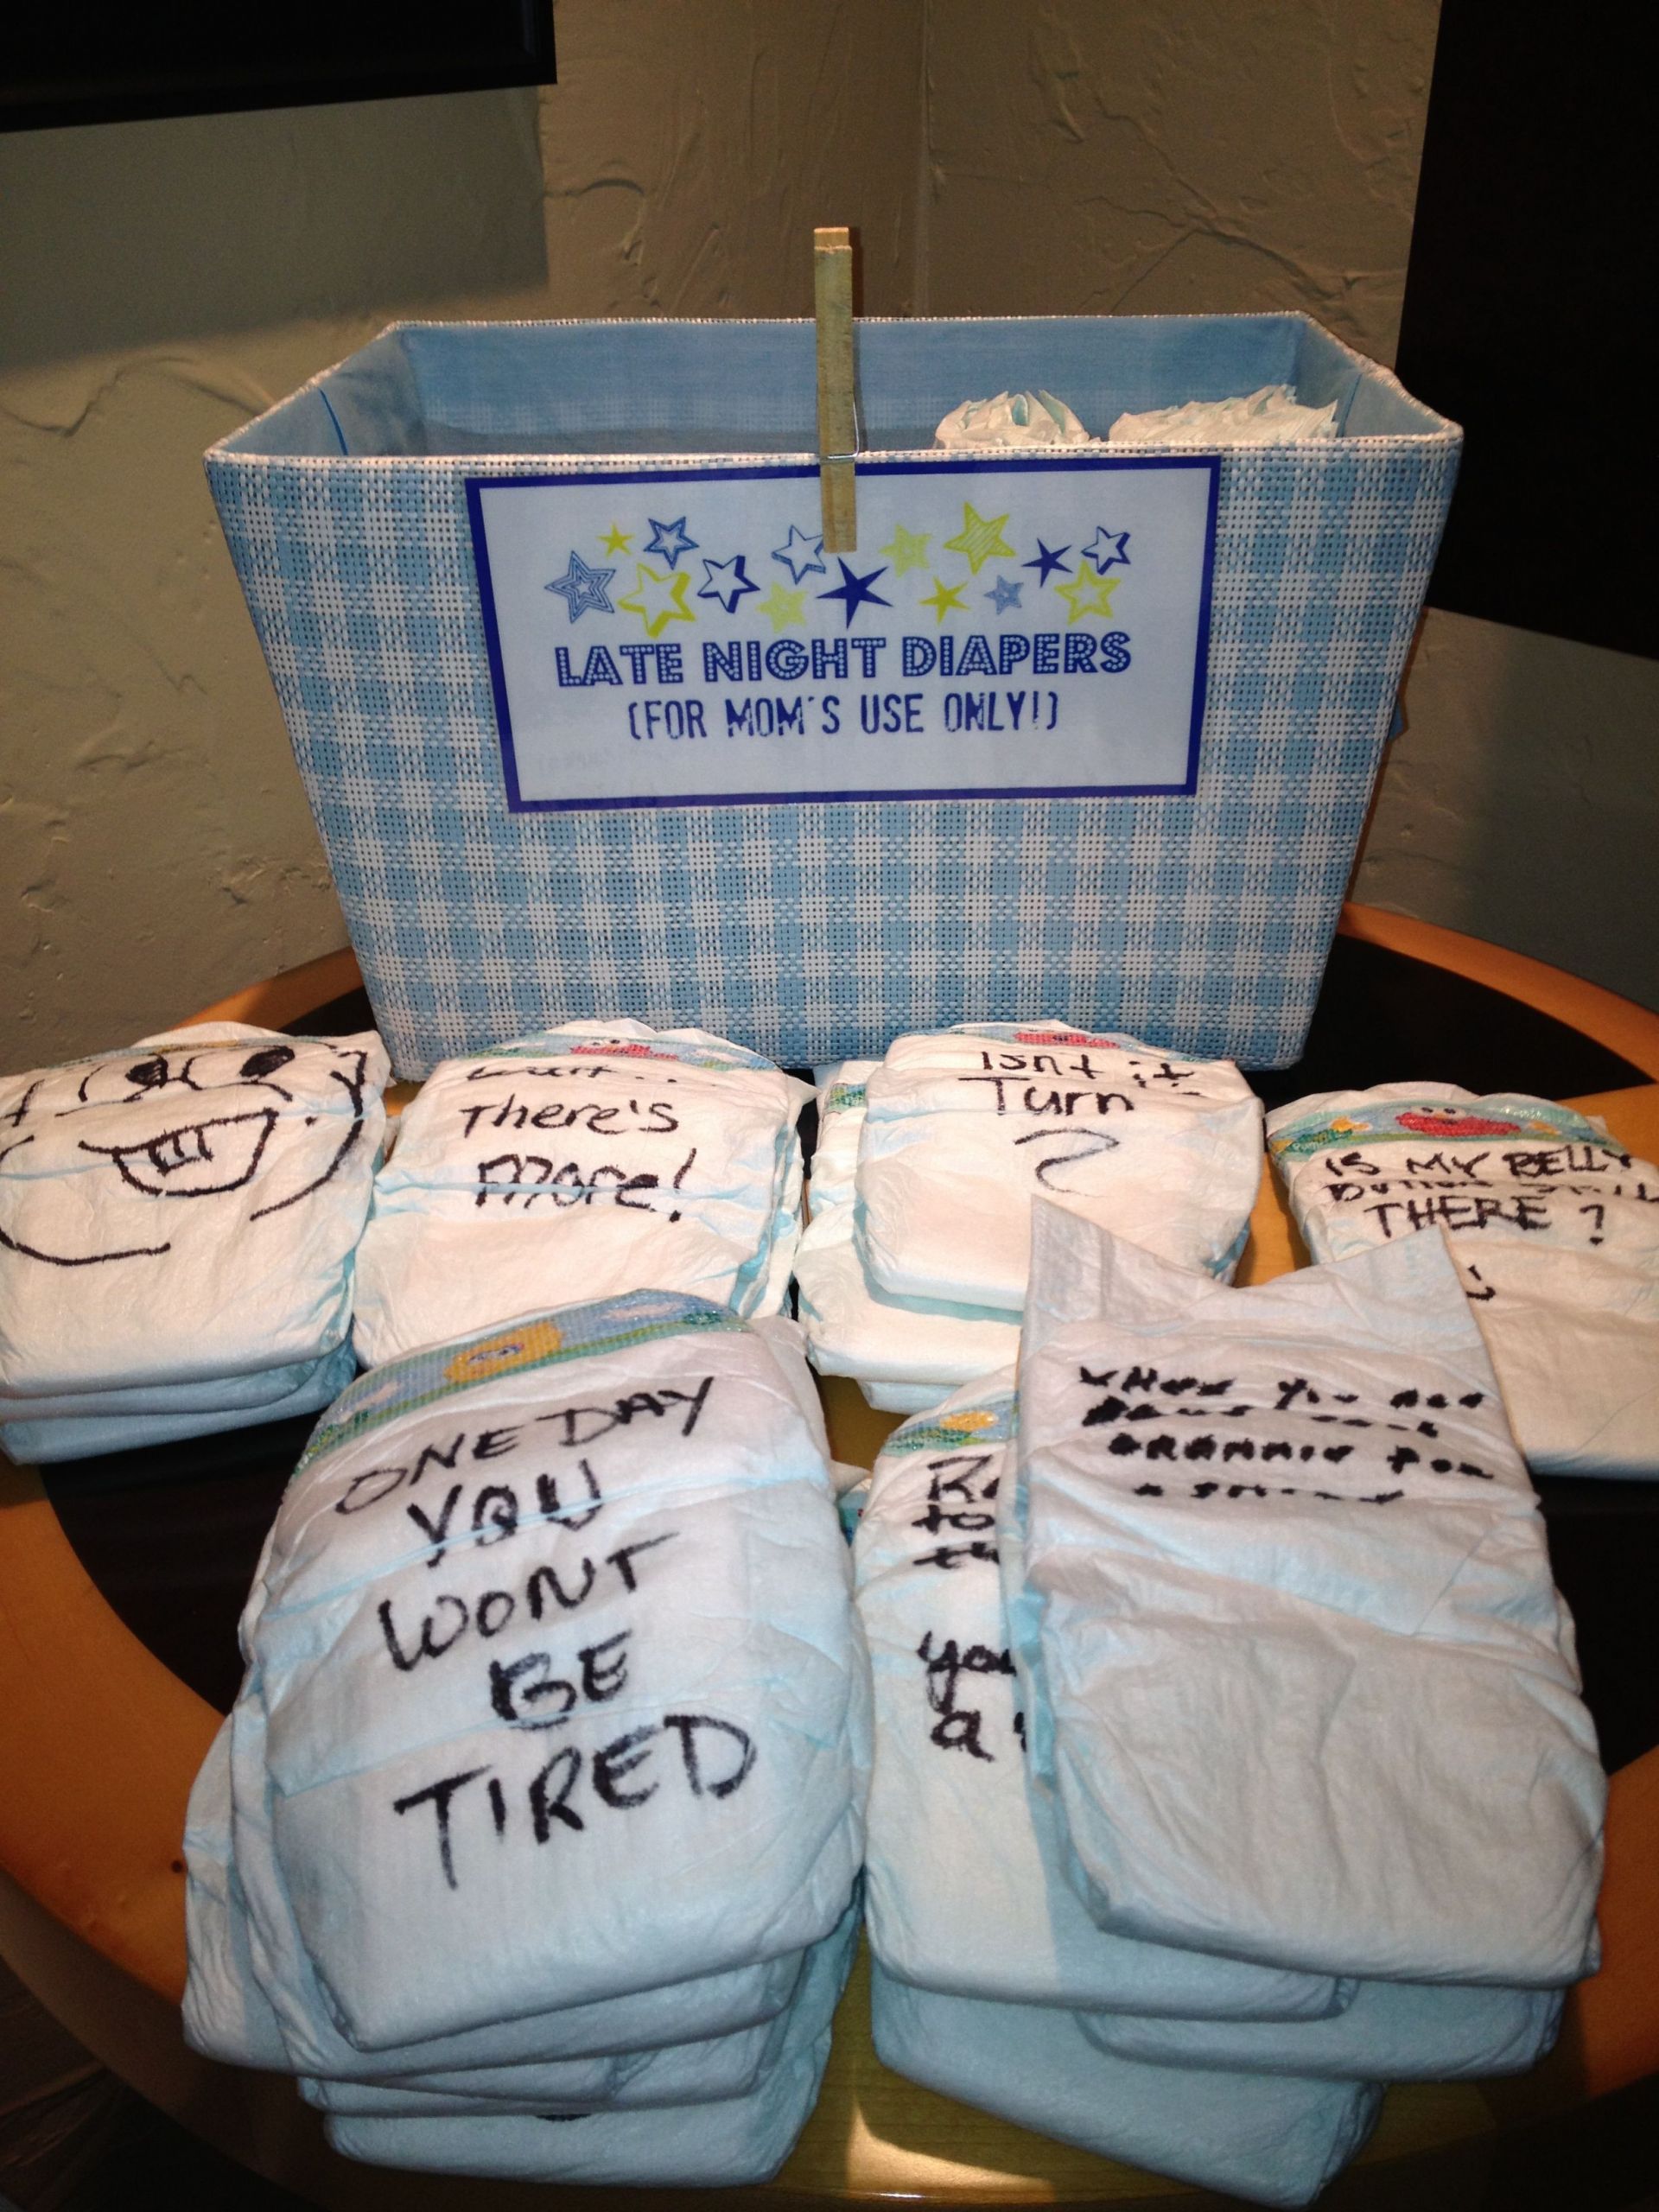 Funny Diaper Quotes For Baby Shower
 at the baby shower we had everyone write down funny